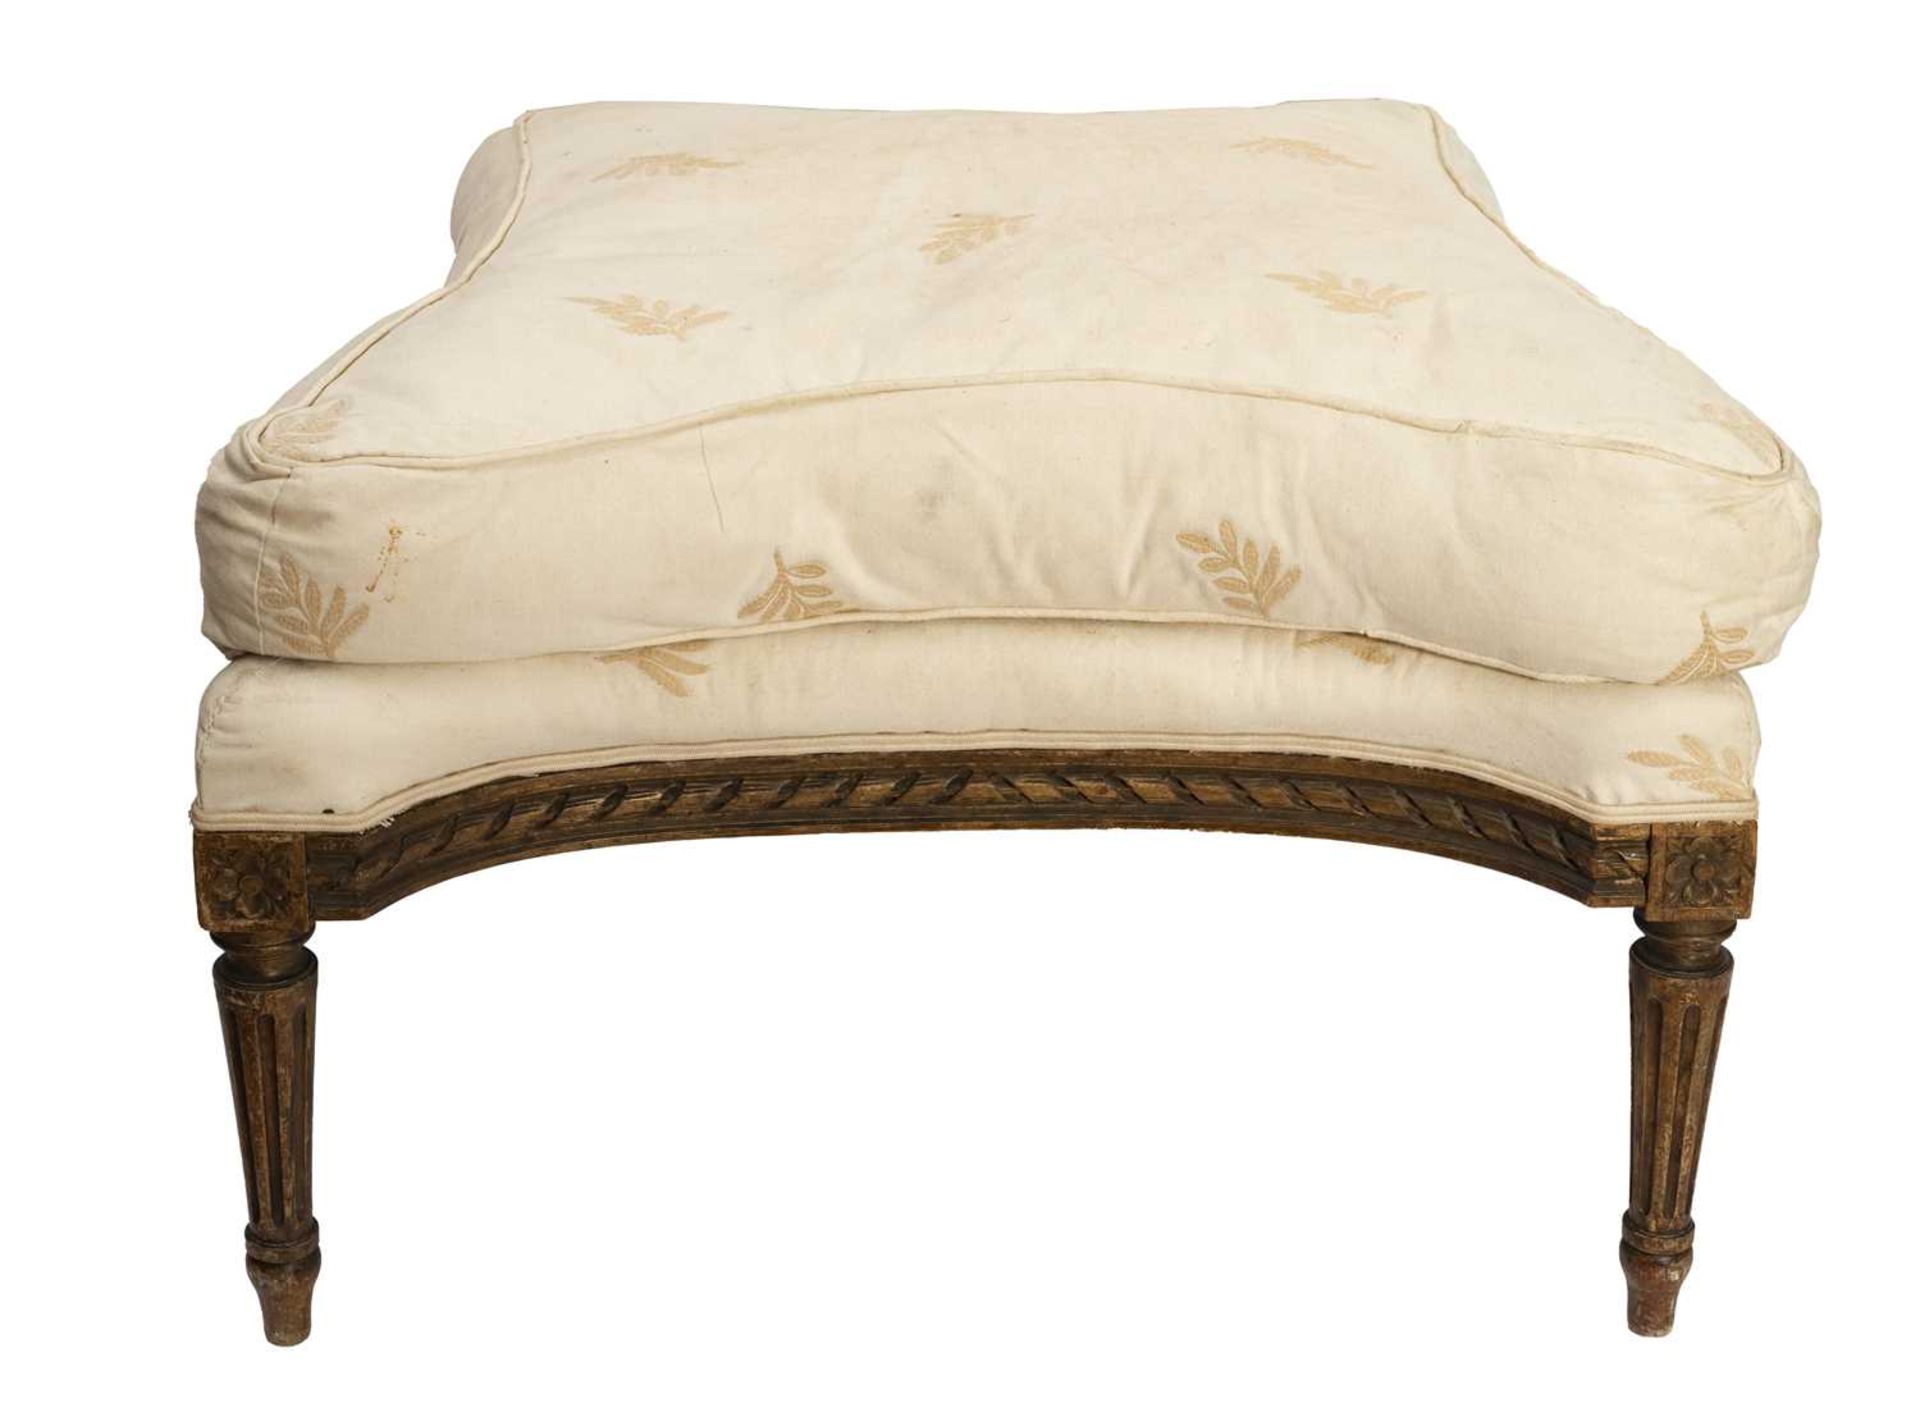 A LOUIS XVI STYLE GILTWOOD UPHOLSTERED STOOL